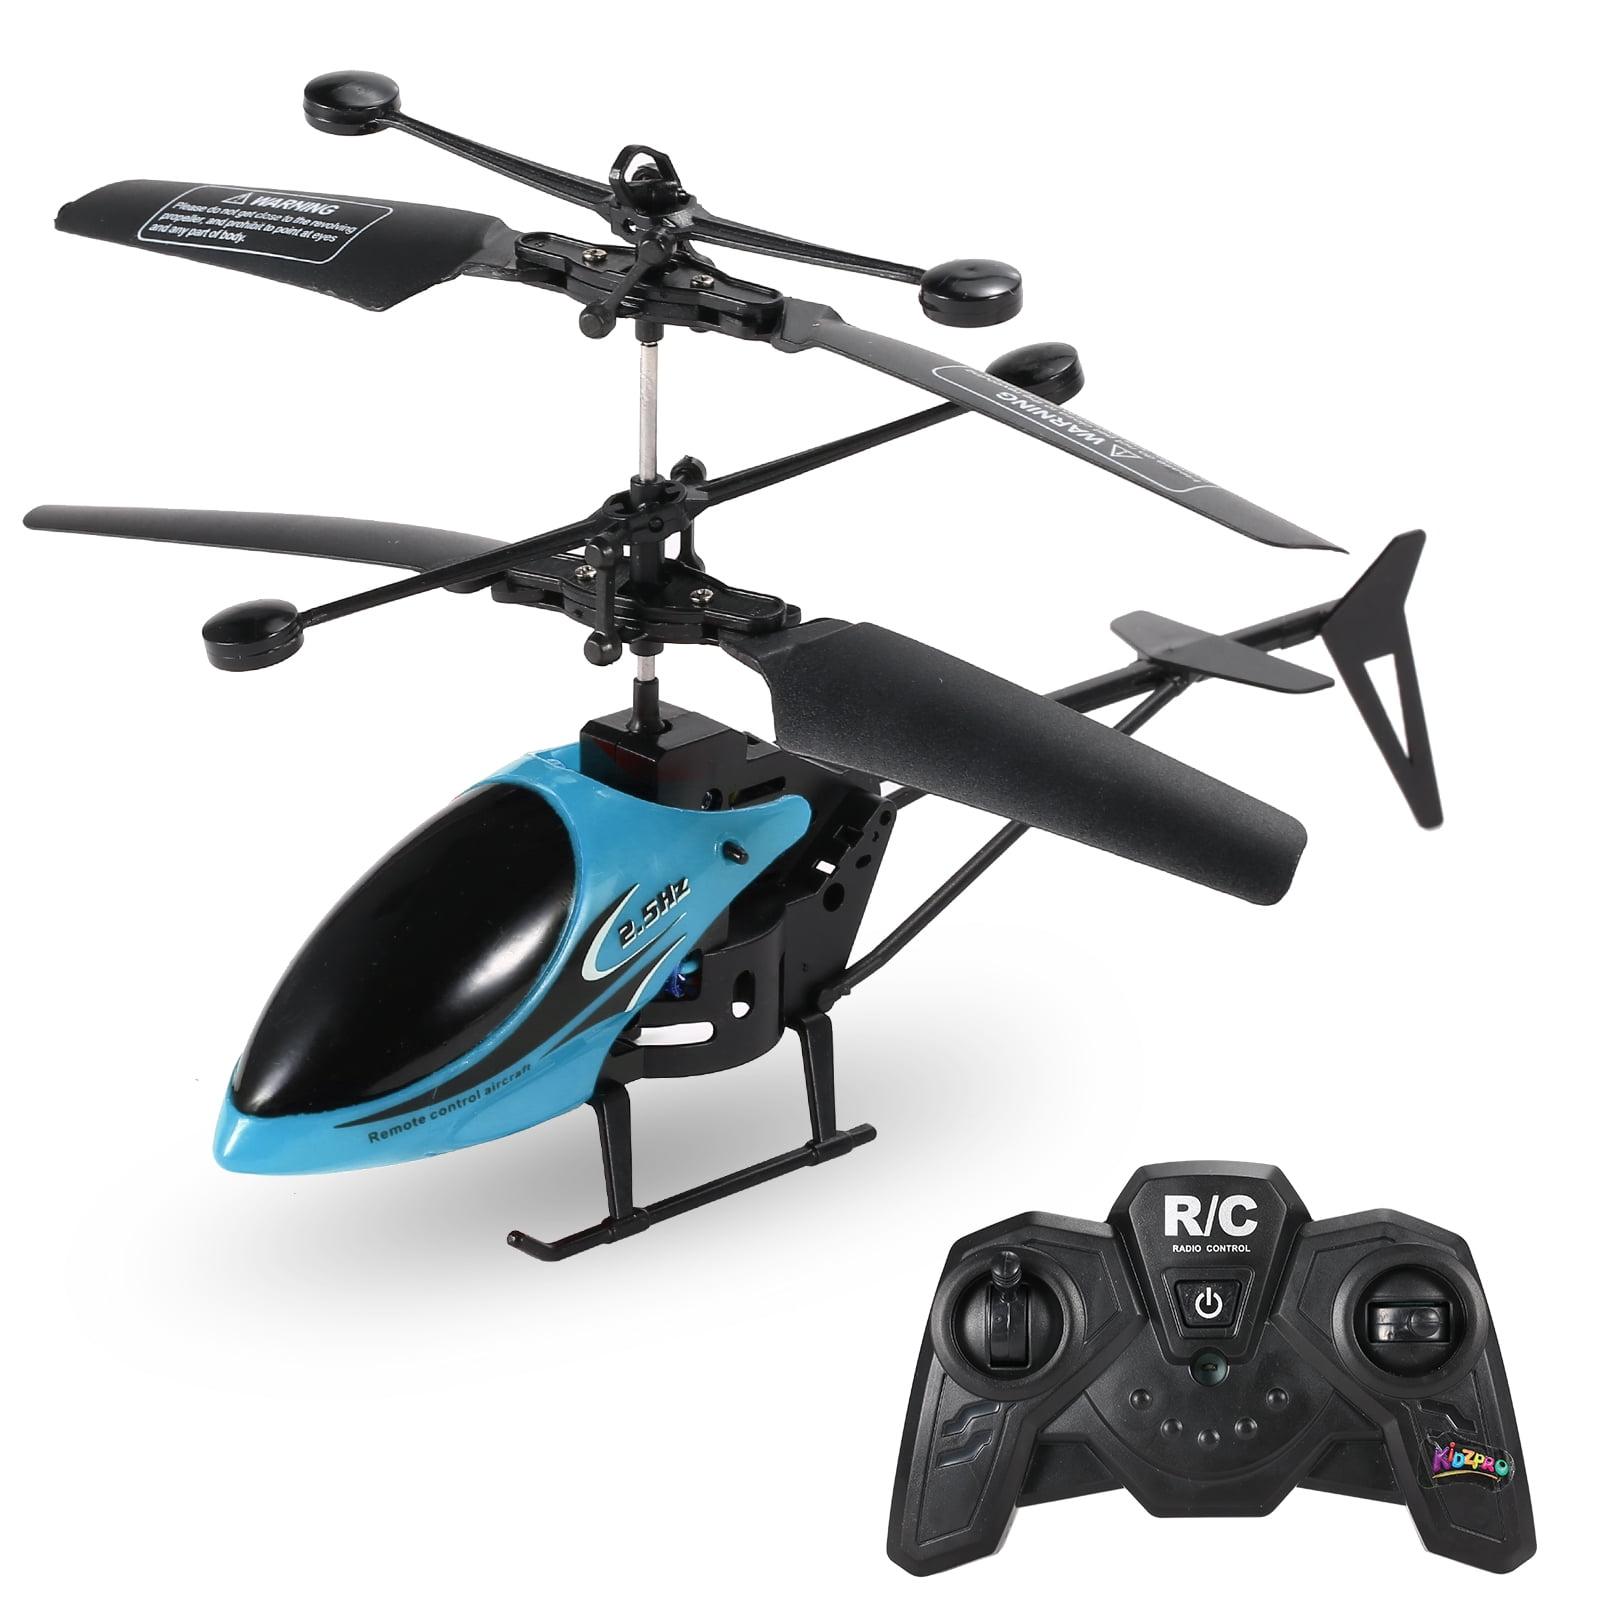 Remote Control Helicopter With: Remote Control Helicopter Features to Consider